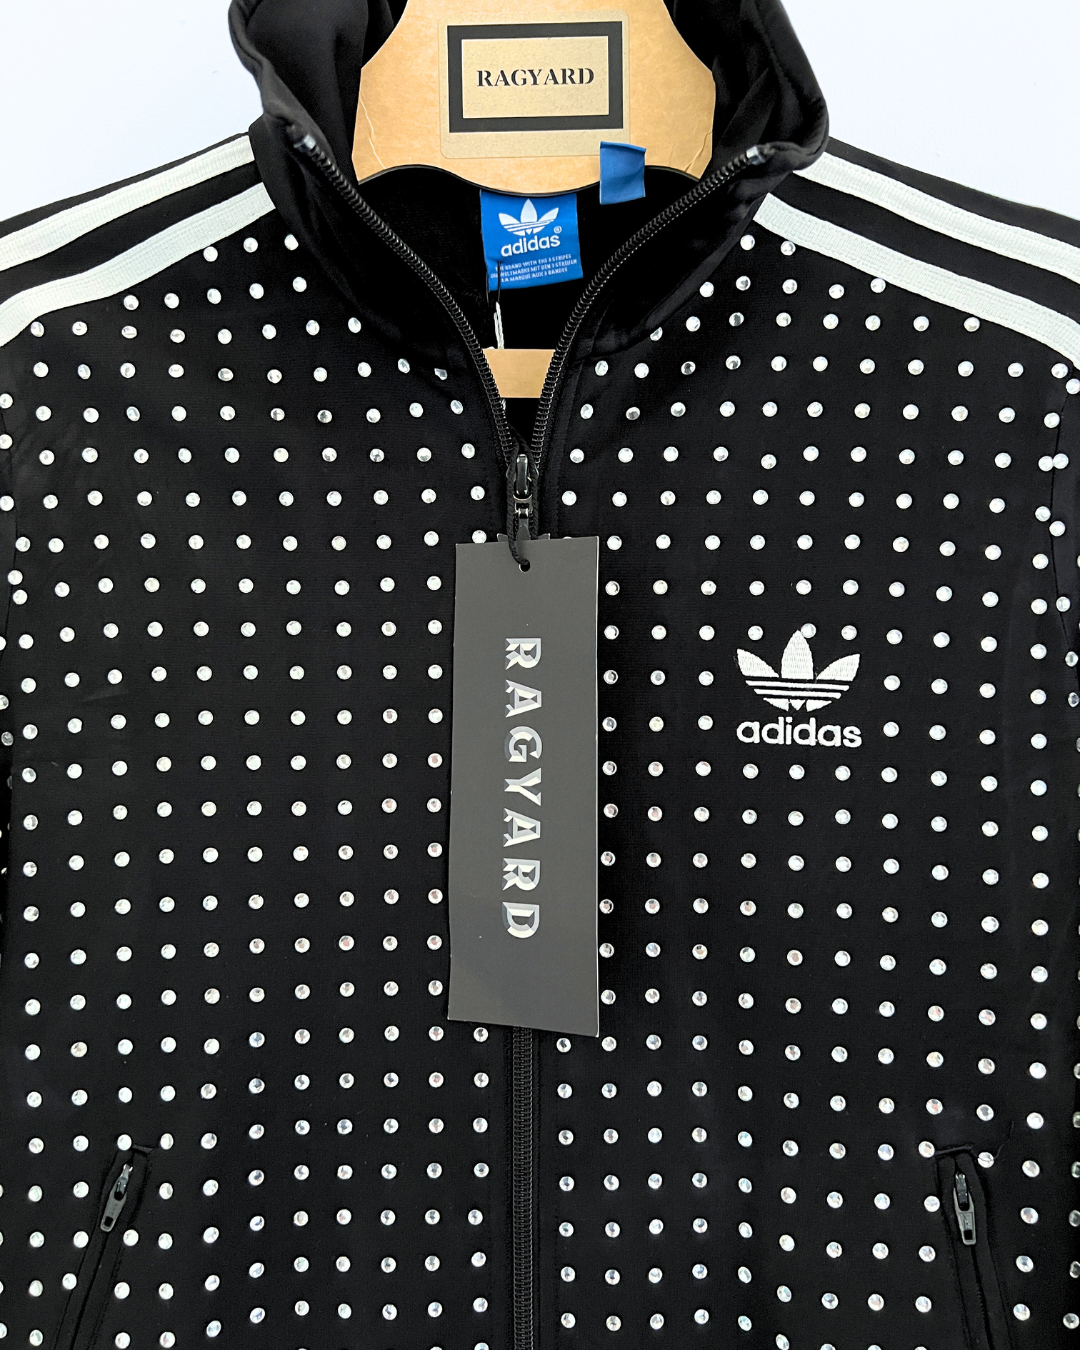 Vintage Black ADIDAS Track-top with all over diamante studs